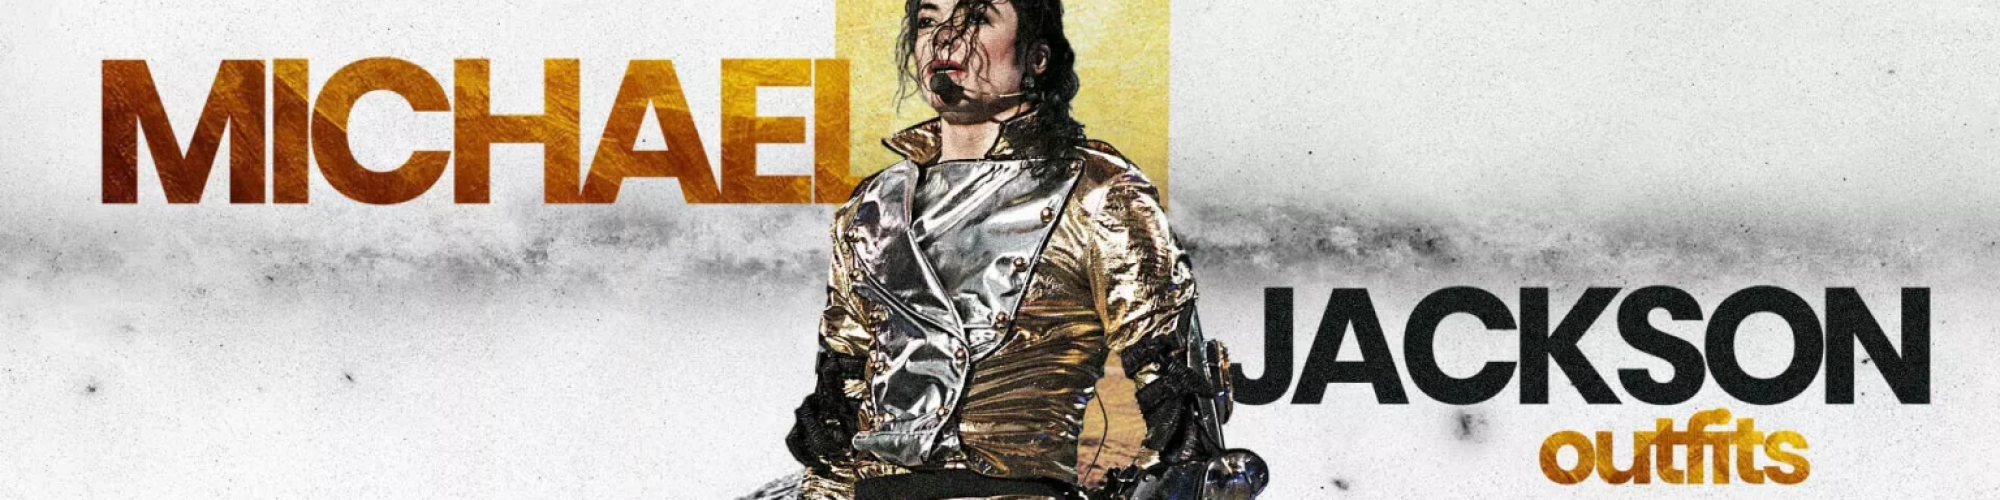 Michael Jackson Outfits cover image